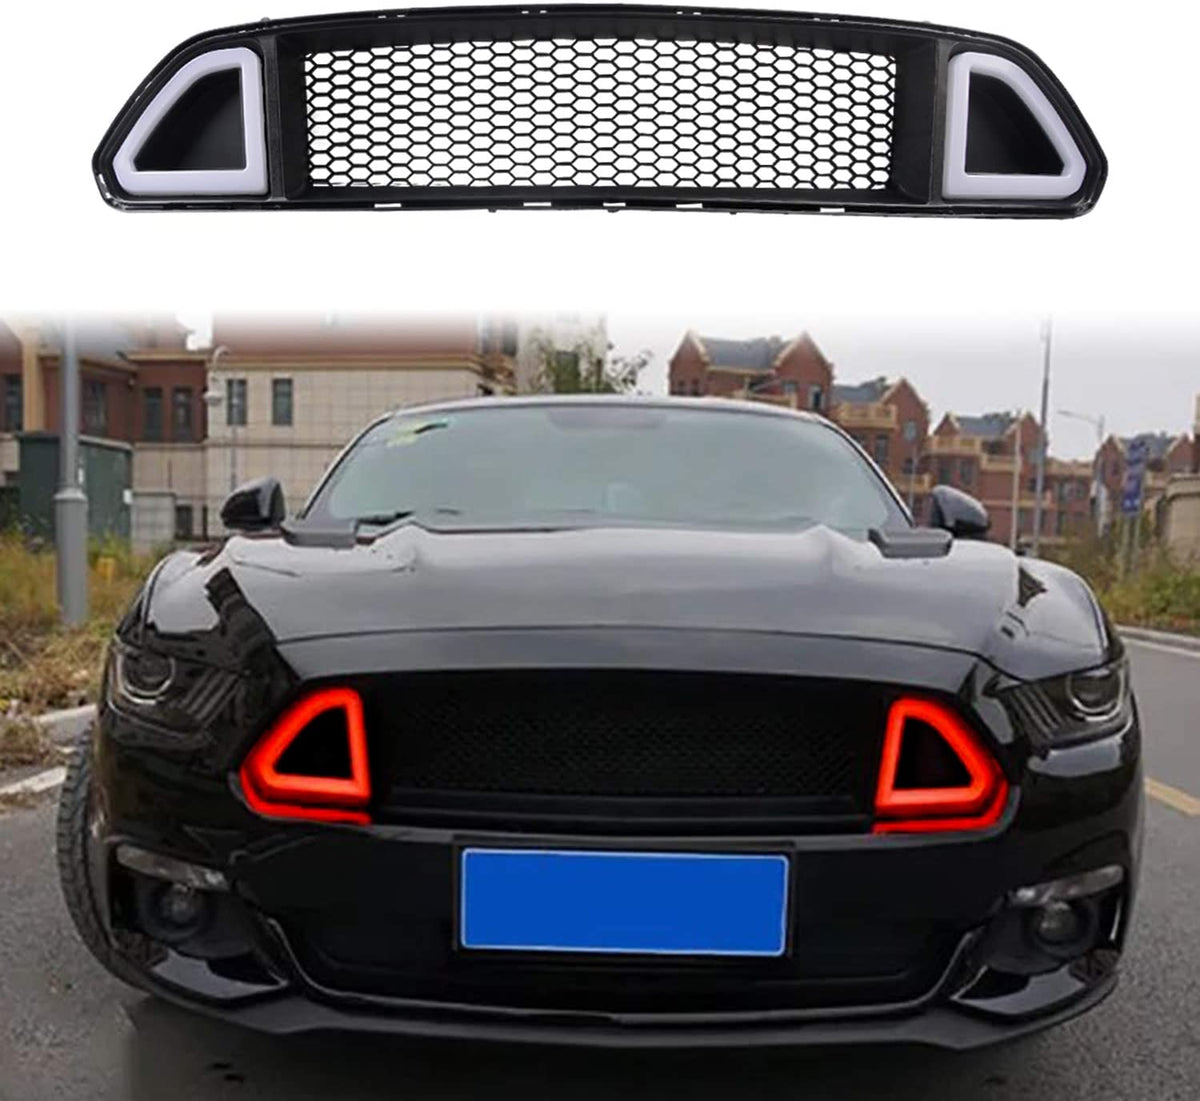 Front Bumper Mesh Grille Grid Grill for Ford Mustang 2015 2016 2017 Wi